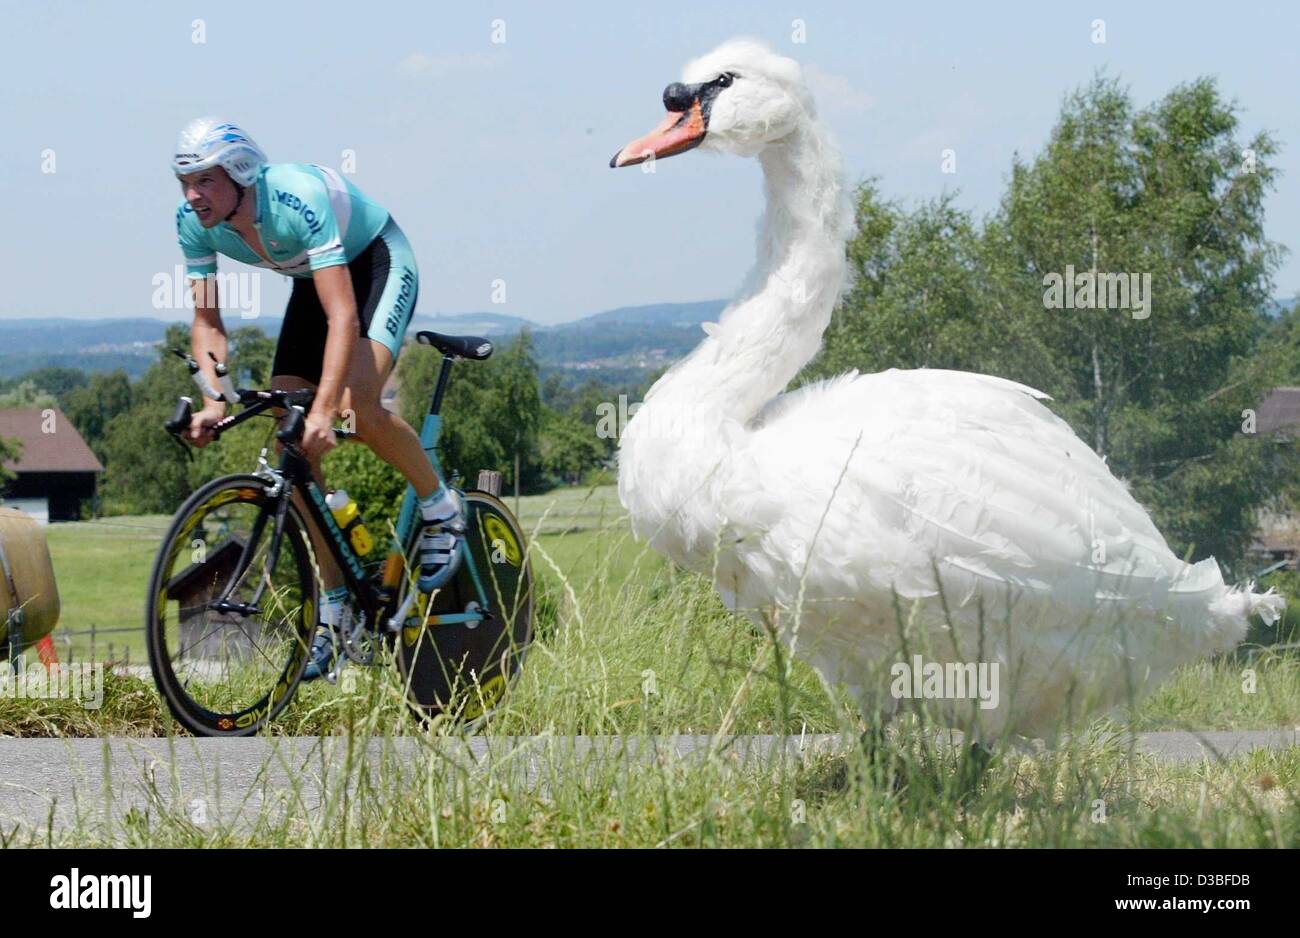 (dpa) - German cyclist Thorsten Rund of the team Bianchi rides past a stuffed swan during the eighth stage of the Tour de Suisse in Gossau, Switzerland, 24 June 2003. The 32.5 km long time trial race had its start and finish in Gossau. Stock Photo